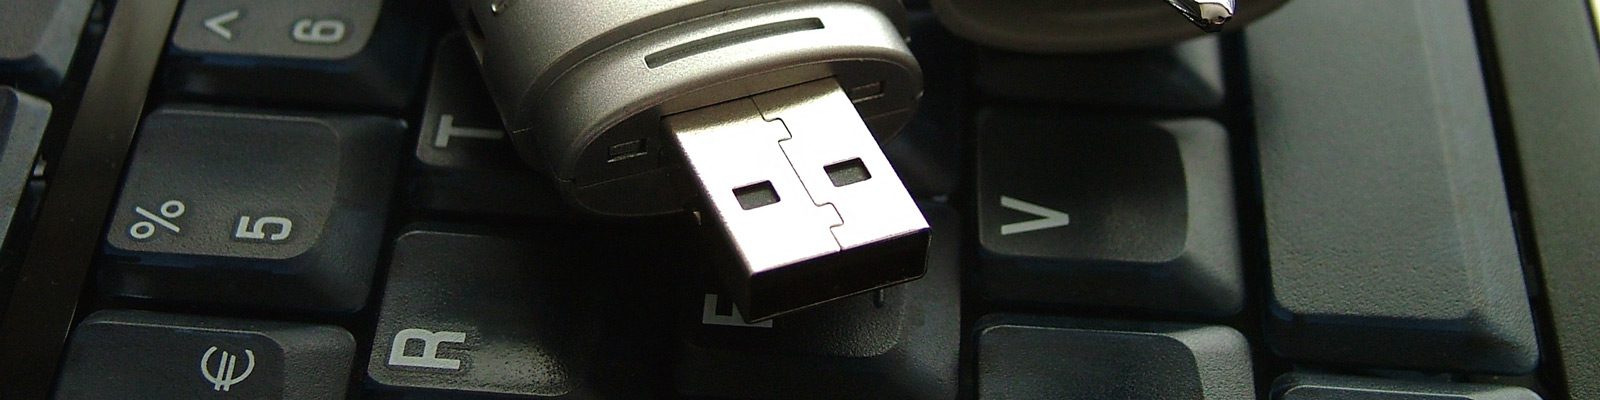 close up of a usb stick on a computer keyboard.